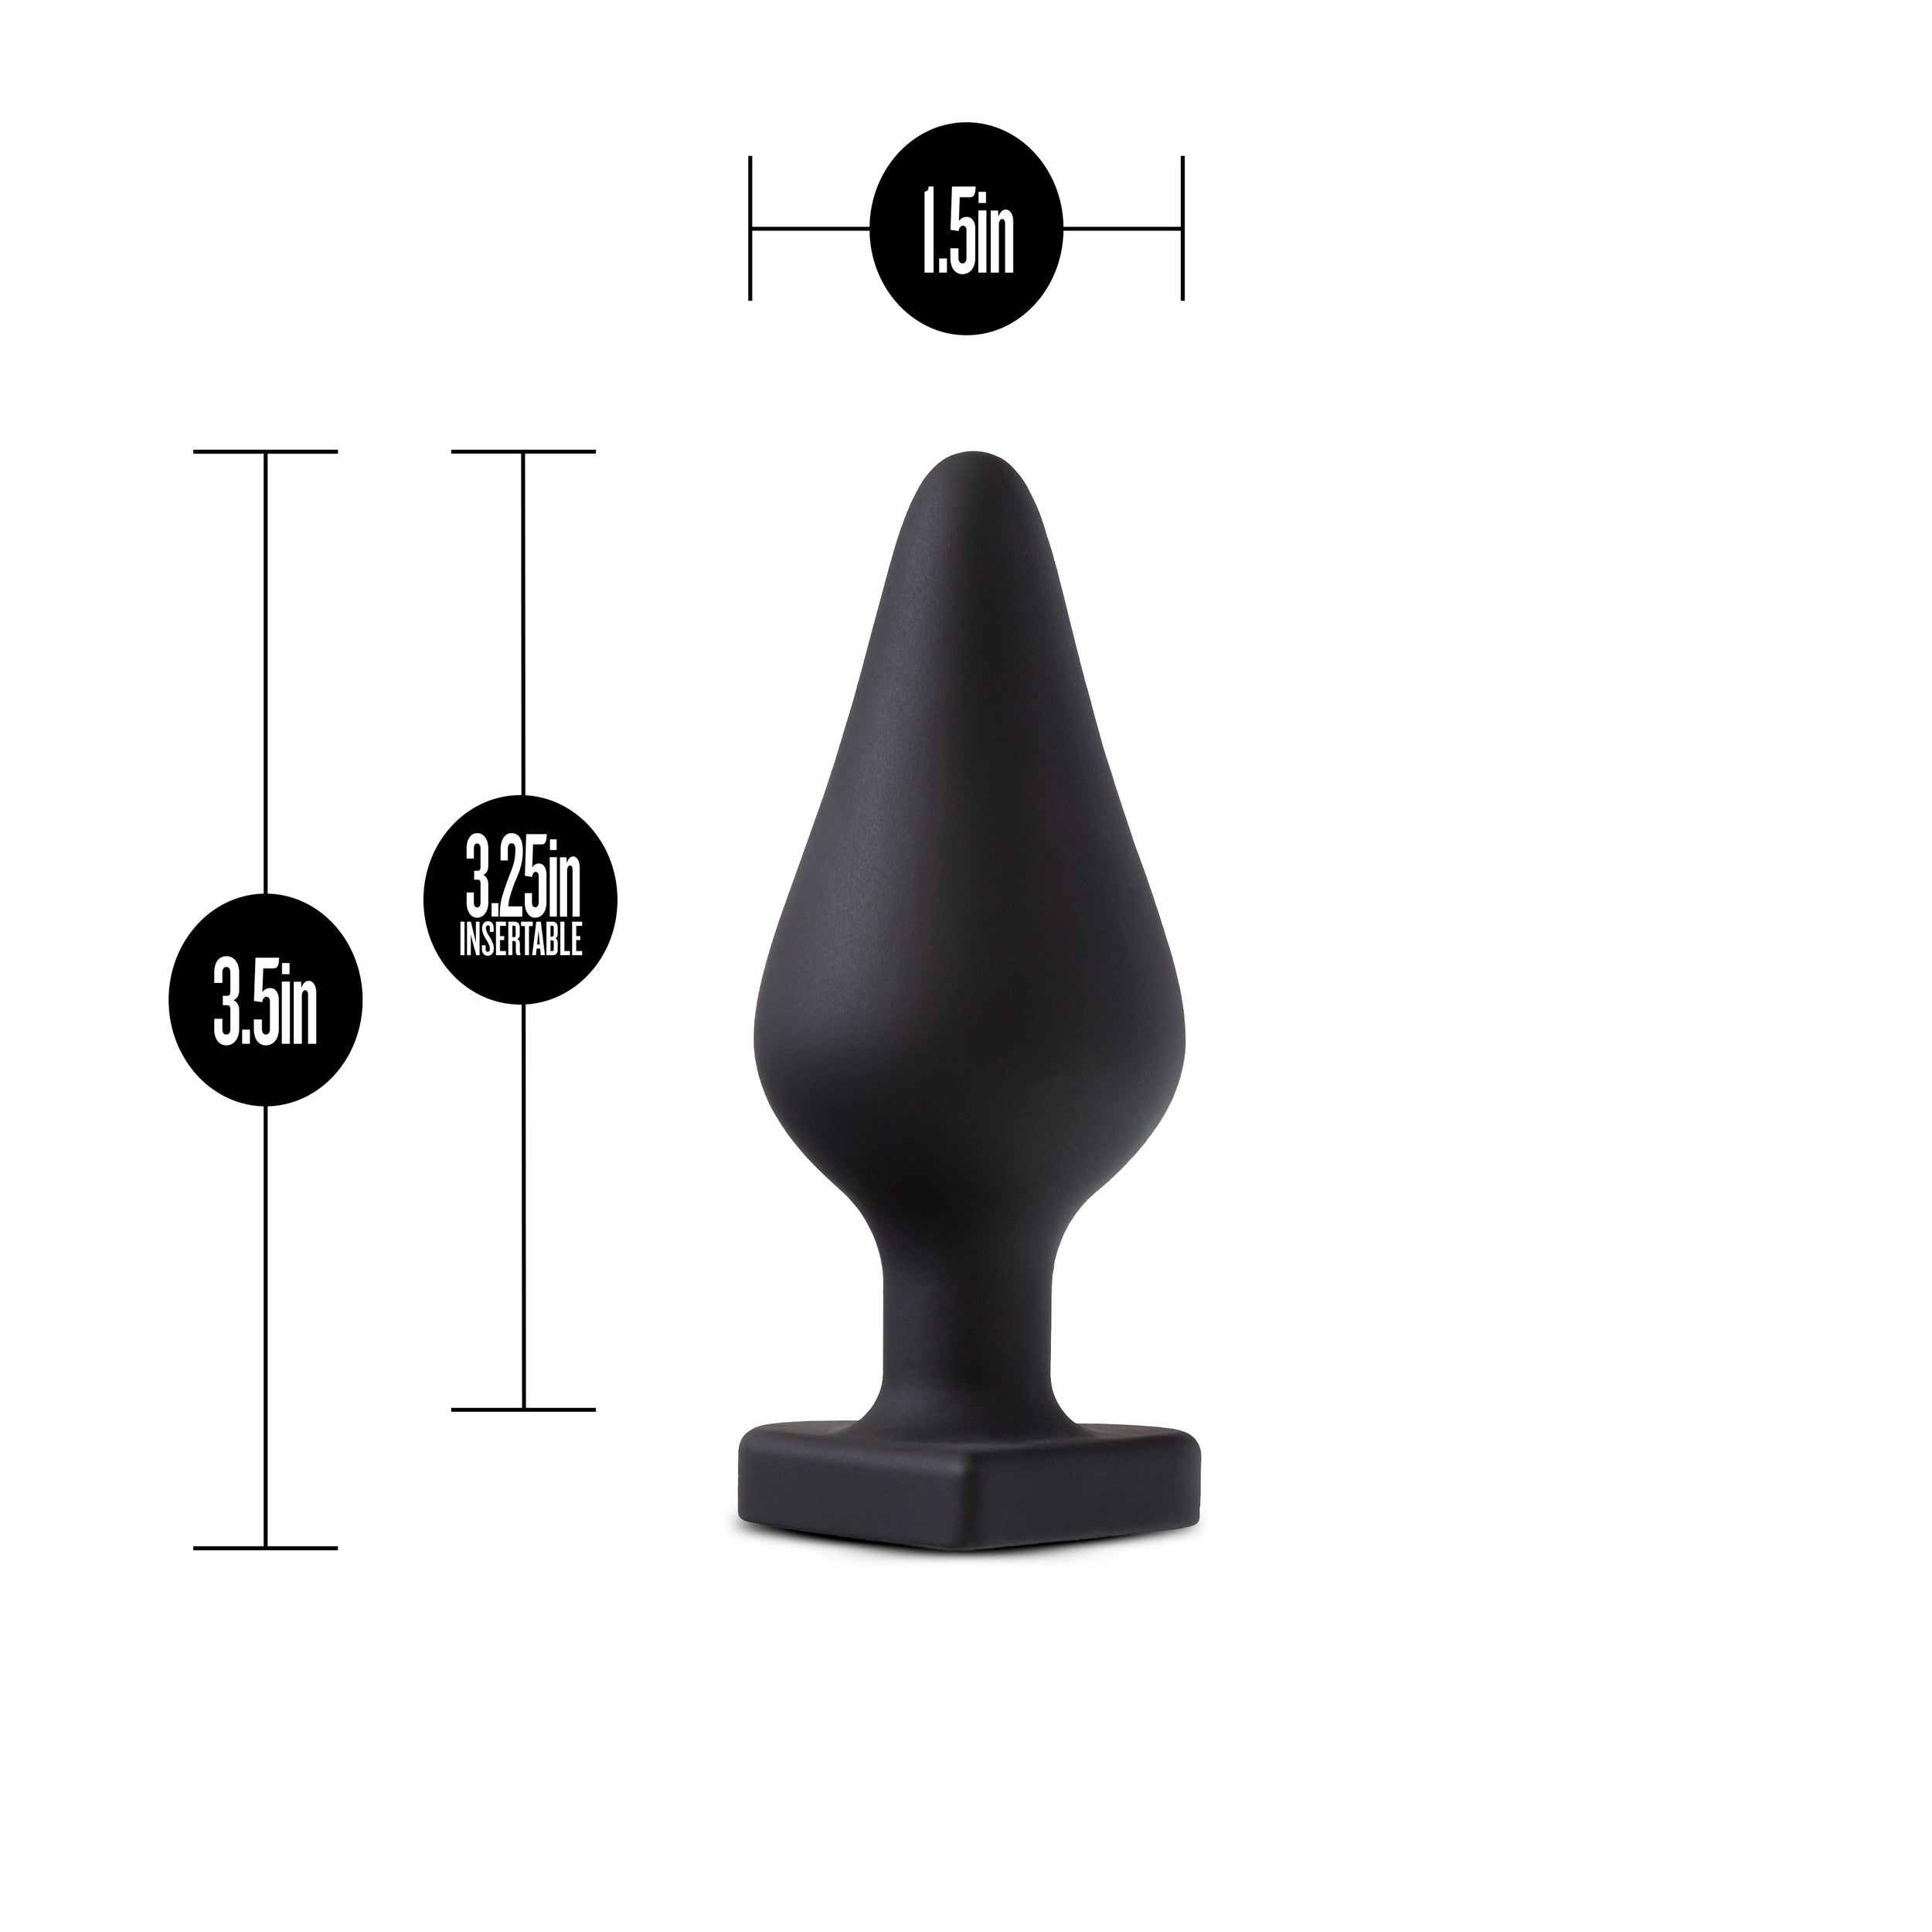 Black Butt Plug with dimensions